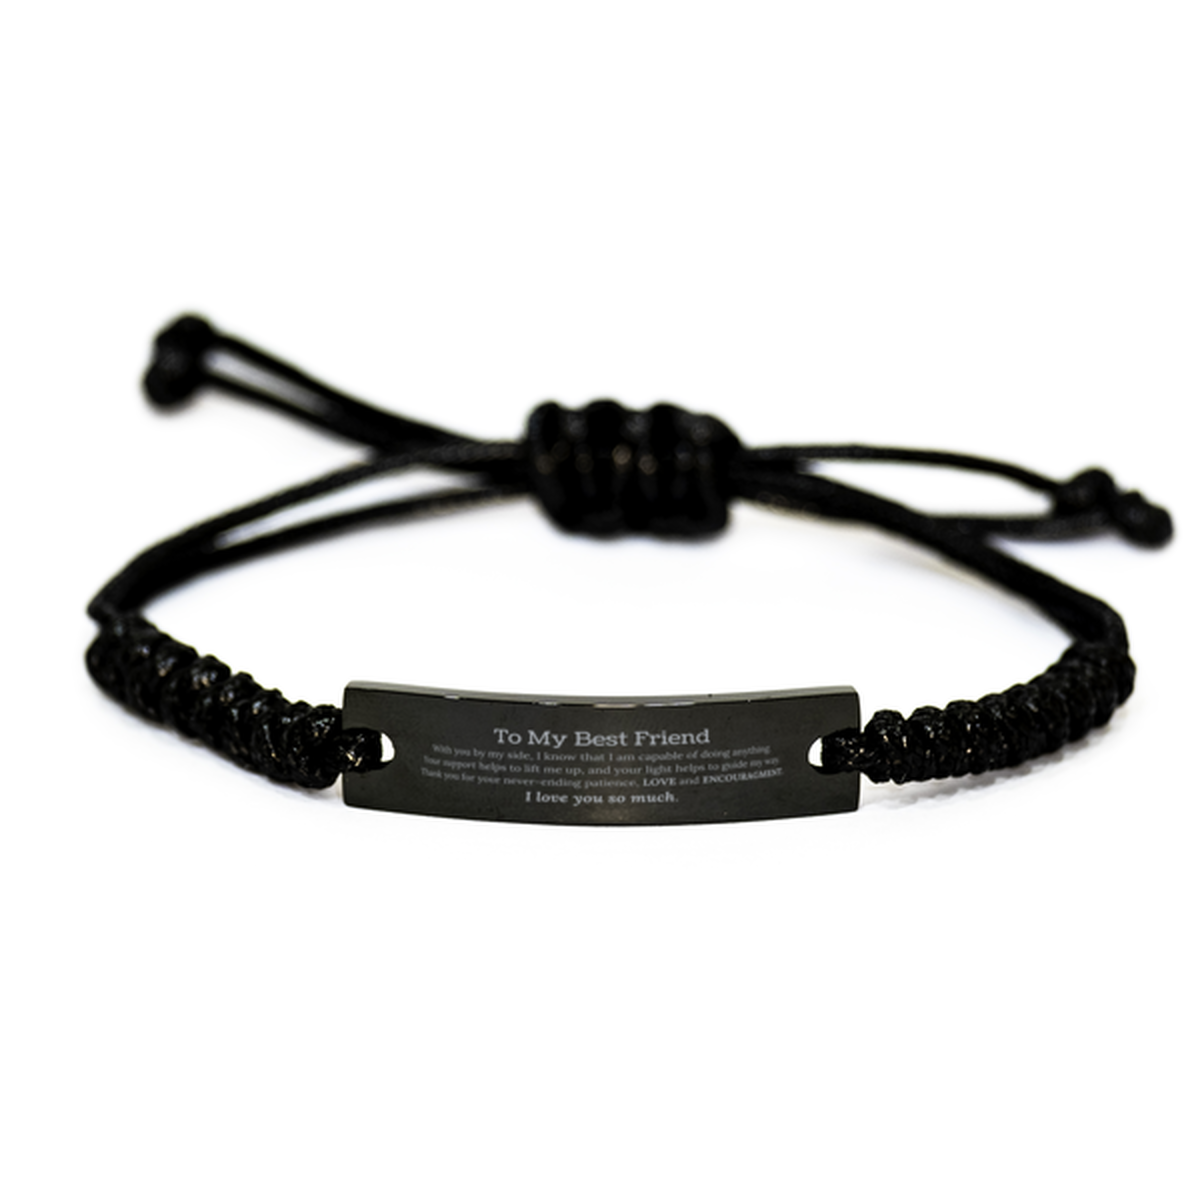 Appreciation Best Friend Black Rope Bracelet Gifts, To My Best Friend Birthday Christmas Wedding Keepsake Gifts for Best Friend With you by my side, I know that I am capable of doing anything. I love you so much